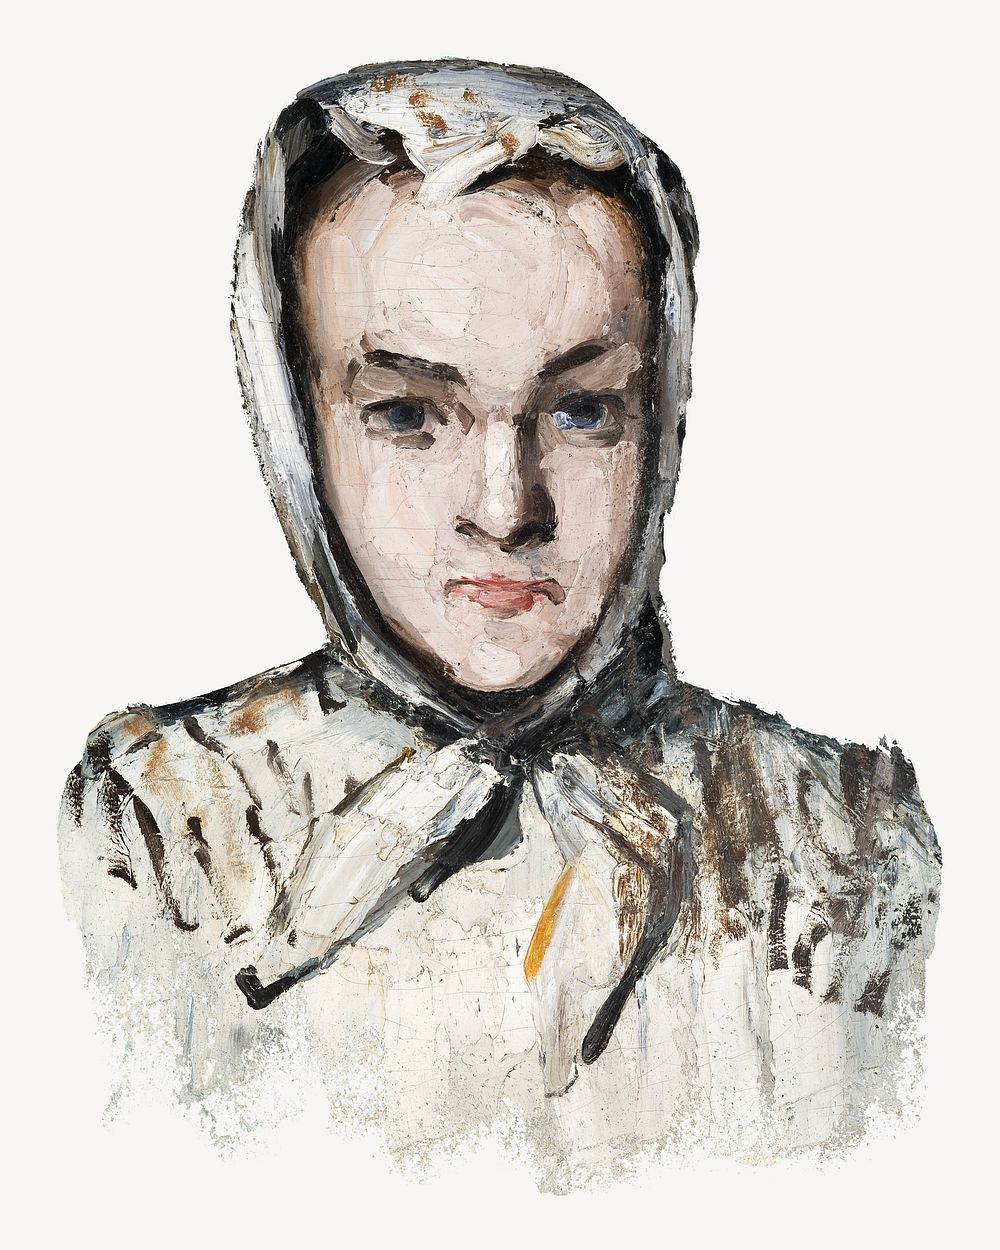 Marie C&eacute;zanne's Sister, post-impressionist portrait painting.   Remixed by rawpixel.